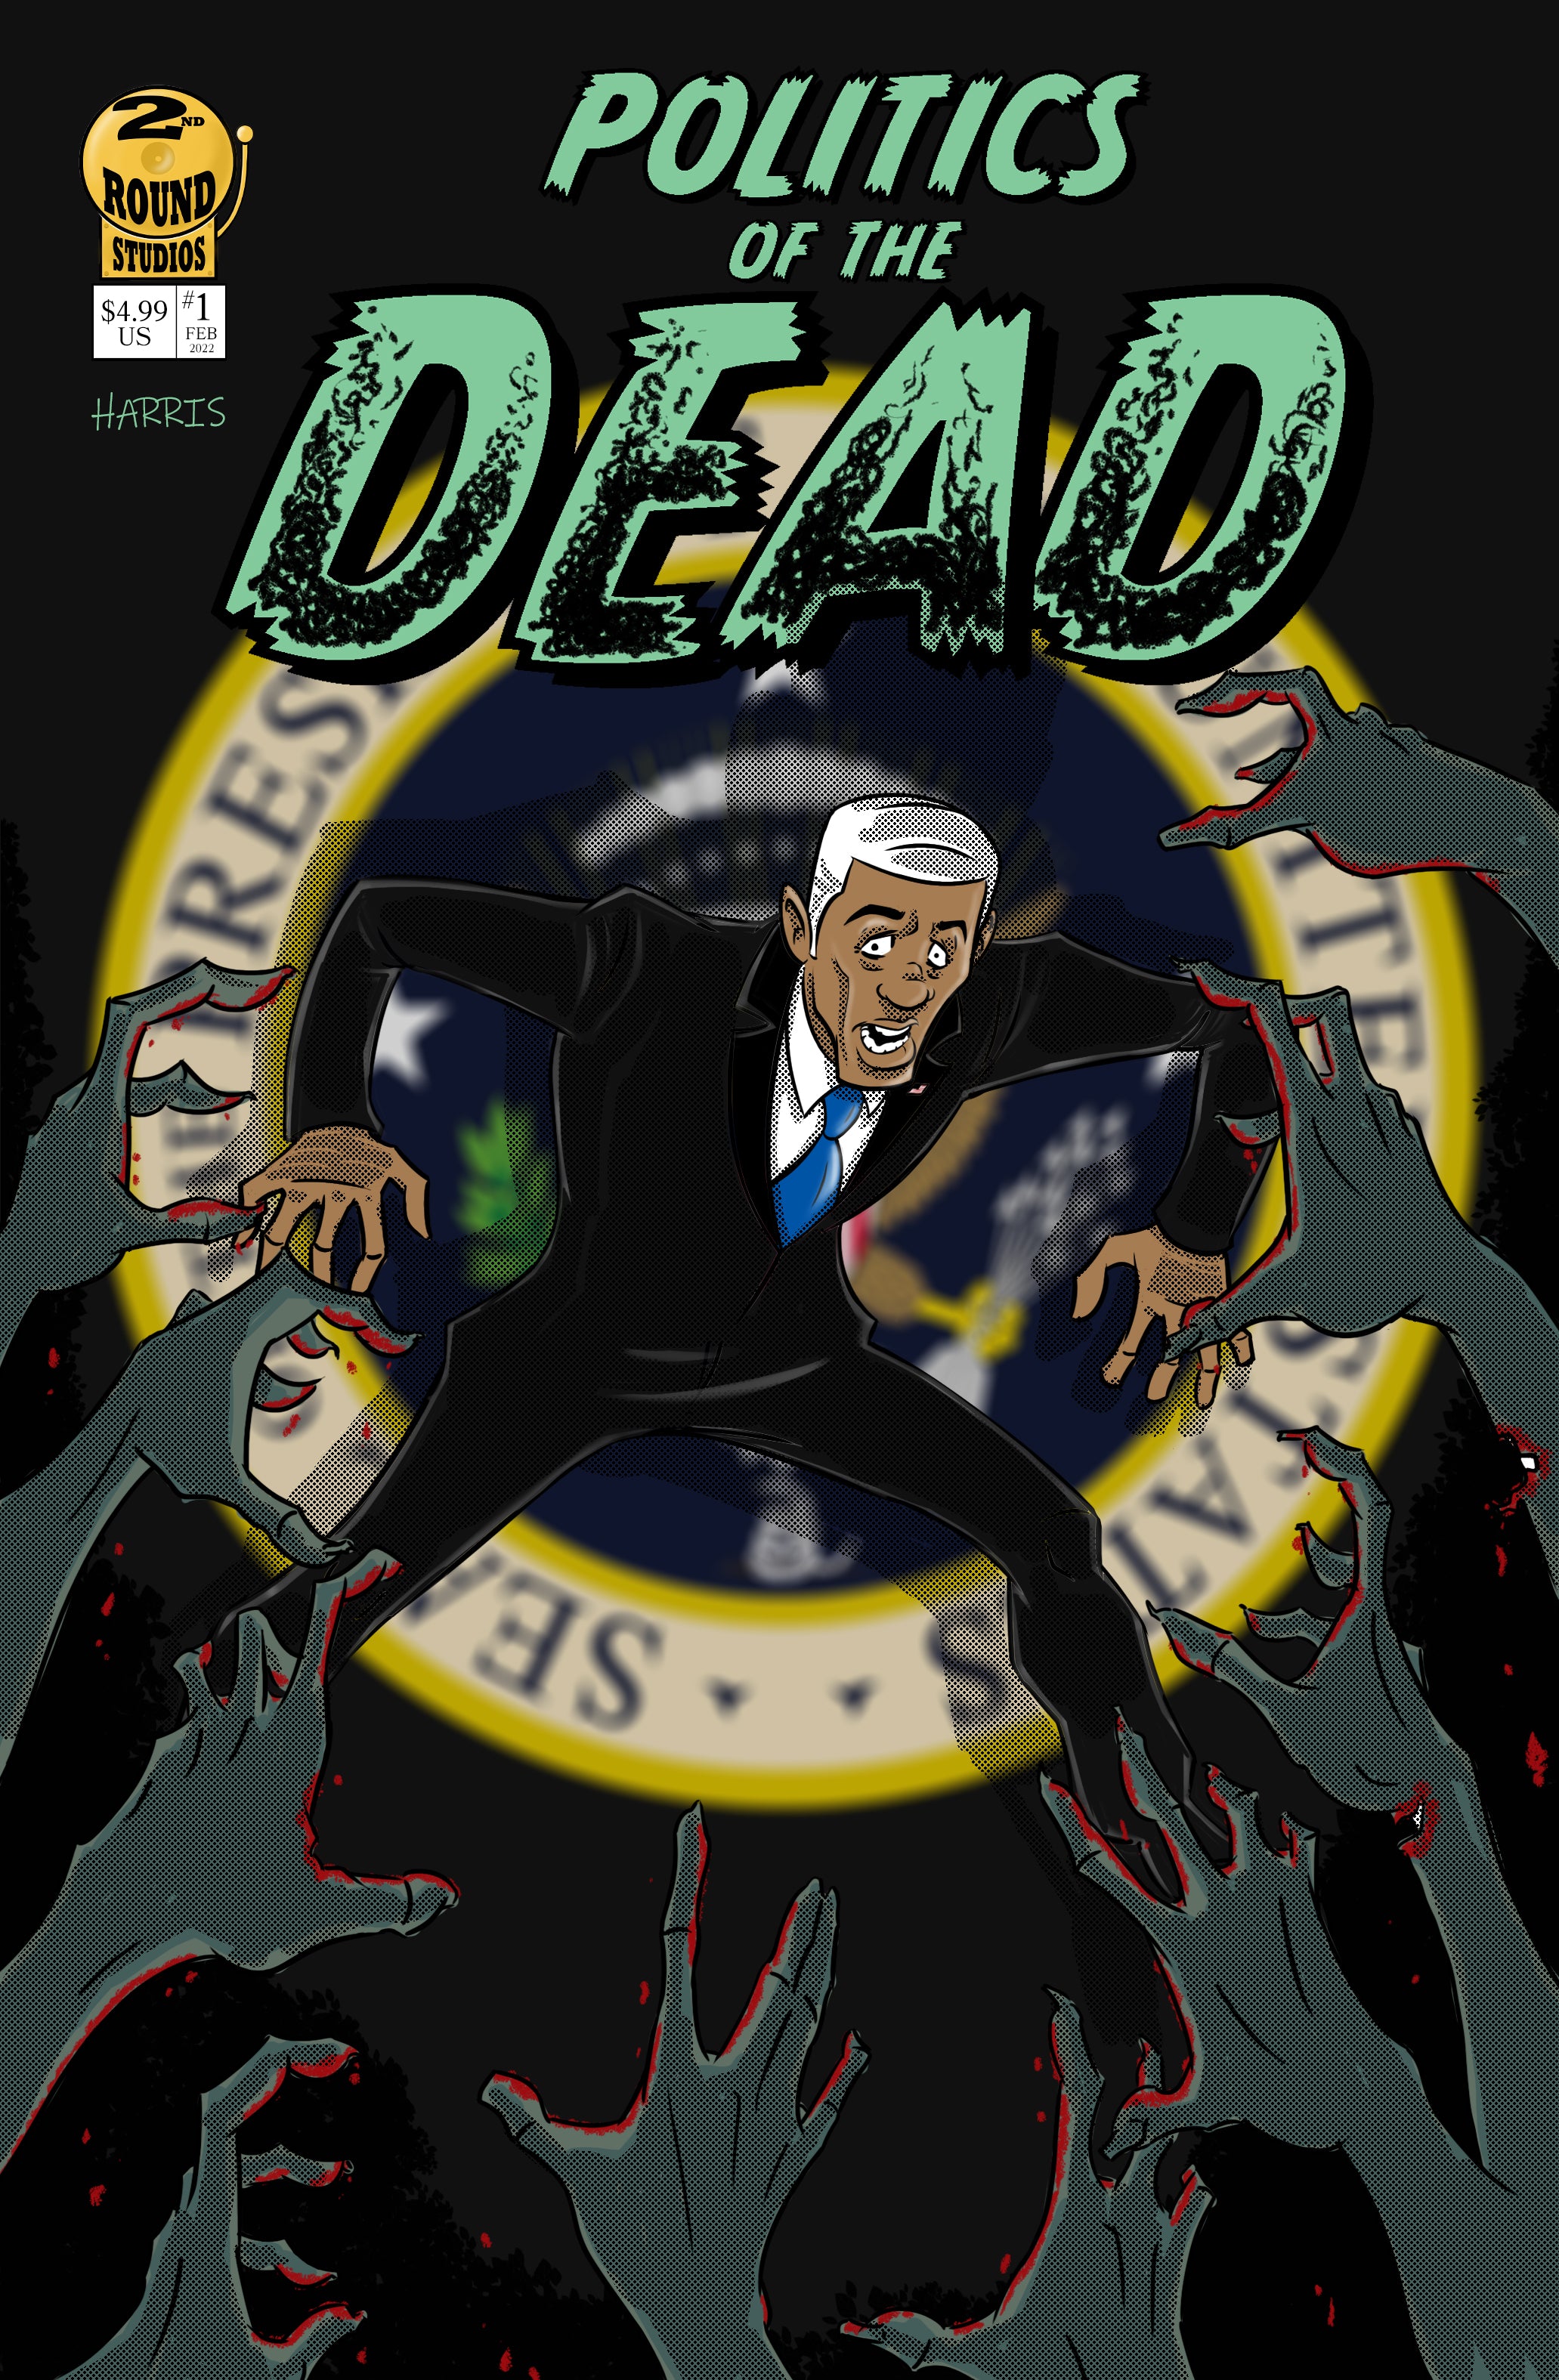 Politics of the Dead comic book cover featuring a black United States president facing a group of zombies